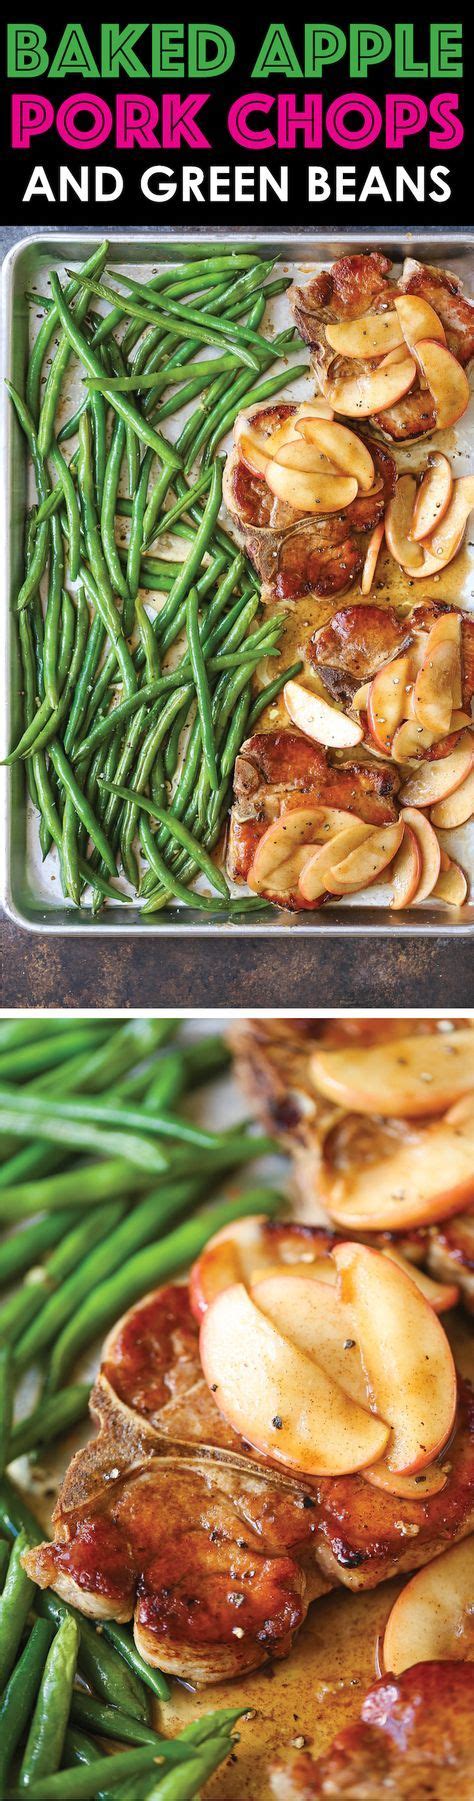 Baked pork chops puttanescapatty cake's pantry. Baked Apple Pork Chops and Green Beans | Recipe | Food recipes, Apple pork chops, Pork recipes